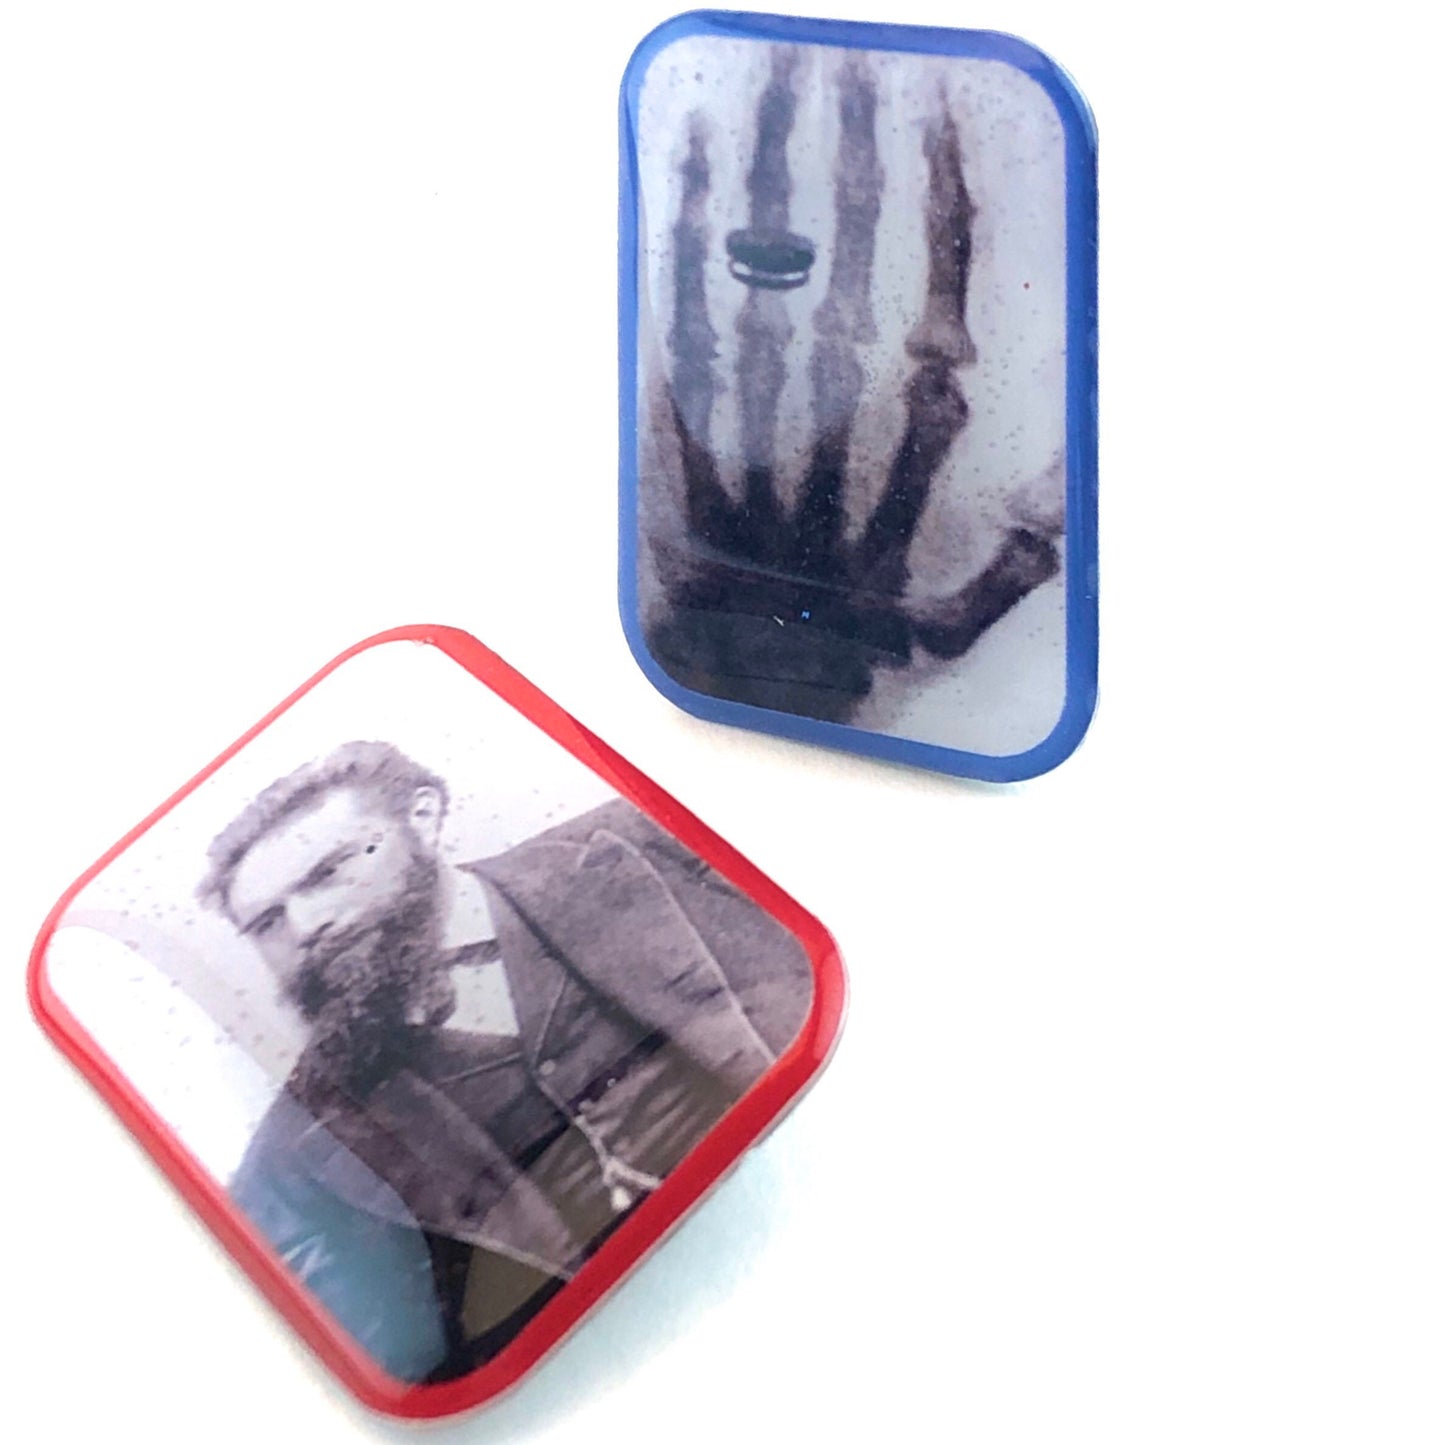 Wilhelm Rontgen Xray Markers with Thin Blue and Red Borders Customized with Initials